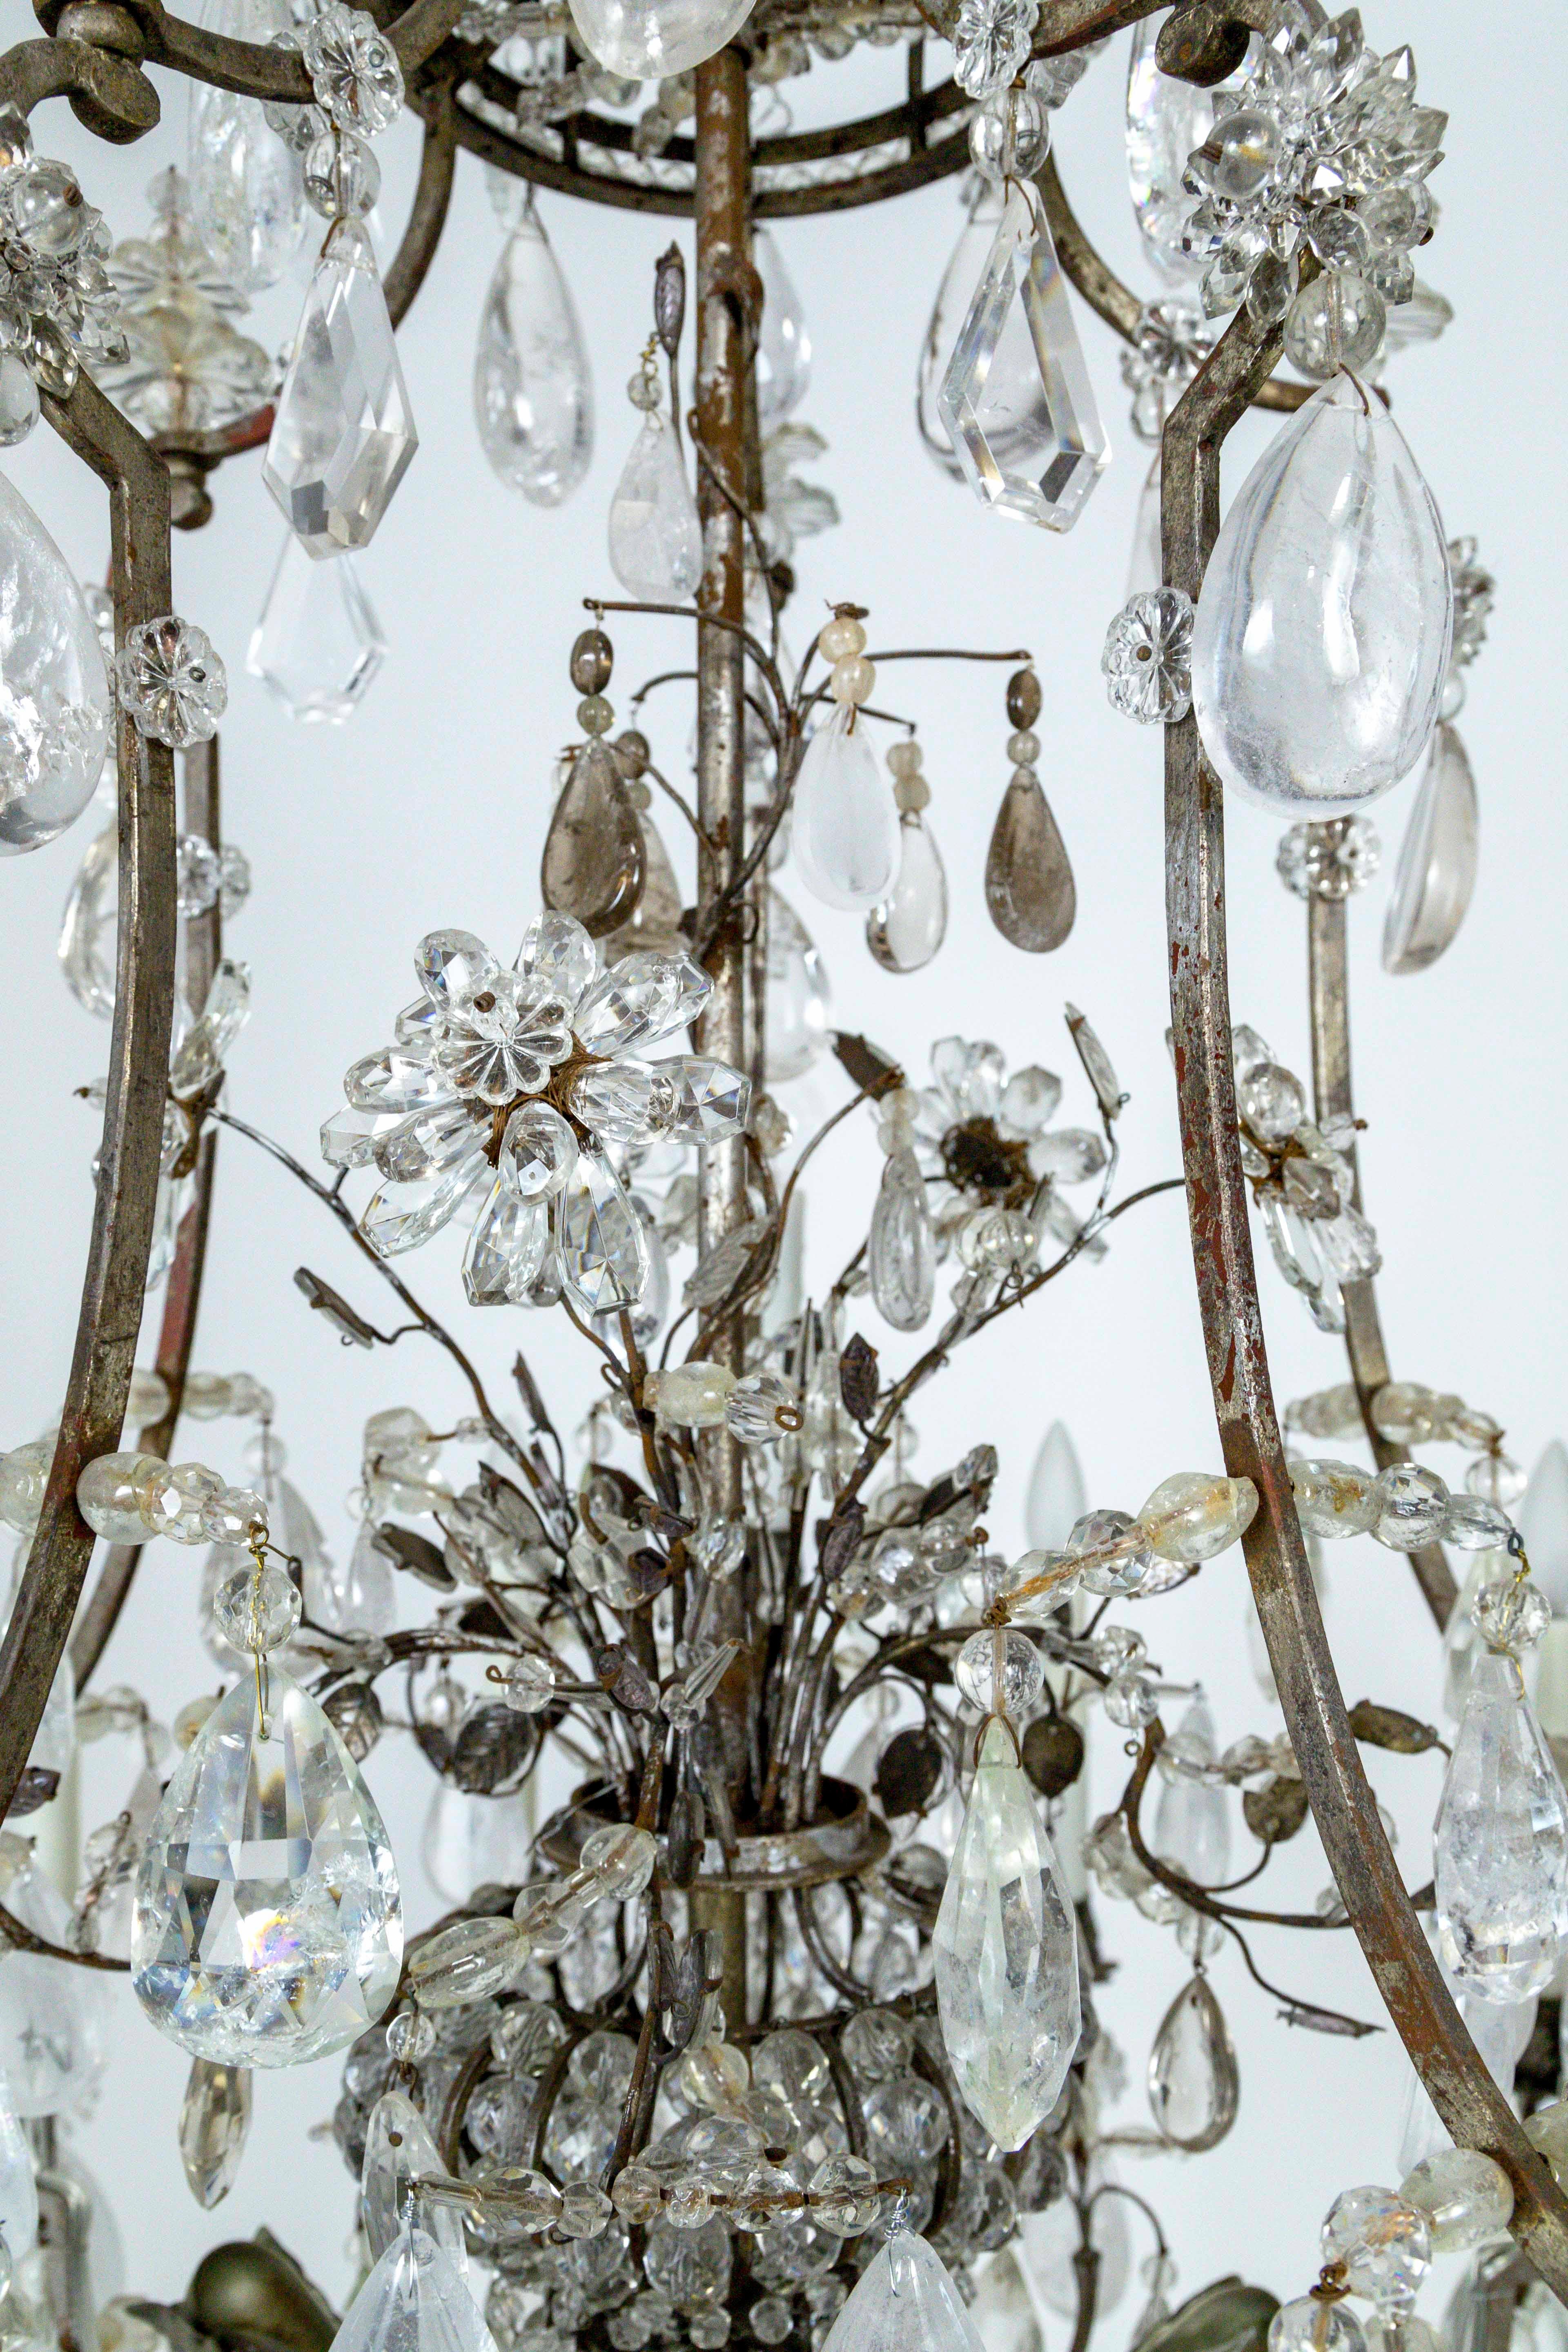 An absolutely magnificent, rare, 20-light, silver-gilded bronze, rock crystal chandelier with impeccable balance and great scale. A birdcage design with an encased flower bouquet, the center column is a crystal beaded Amphora jar shape that holds